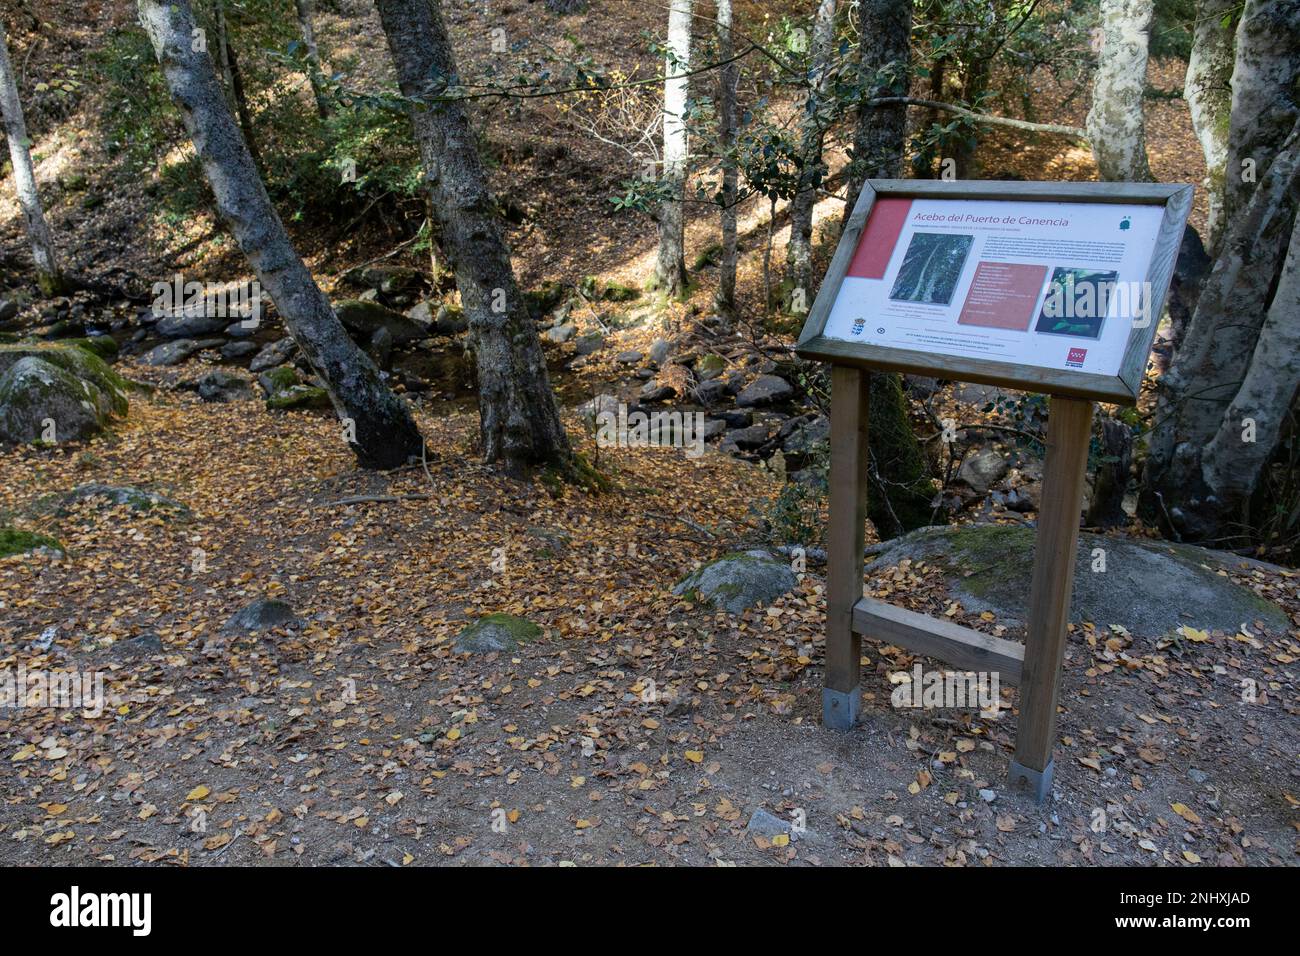 Information panel on the path of the Abedular de Canencia, on November 6, 2022, in Canencia, Madrid (Spain). El Abedular de Canencia is located near the Puerto de Canencia and has an abundant number of species, including the protagonist of this space, the birch, or some protected species such as holly and yew. This type of island forest is one of the botanical rarities of the Sierra Norte, since the fact of being geographically in the central area of the peninsula means that in specific places species more typical of both the north and south of the peninsula are preserved. 11 NOVEMBER 2022;BIR Stock Photo